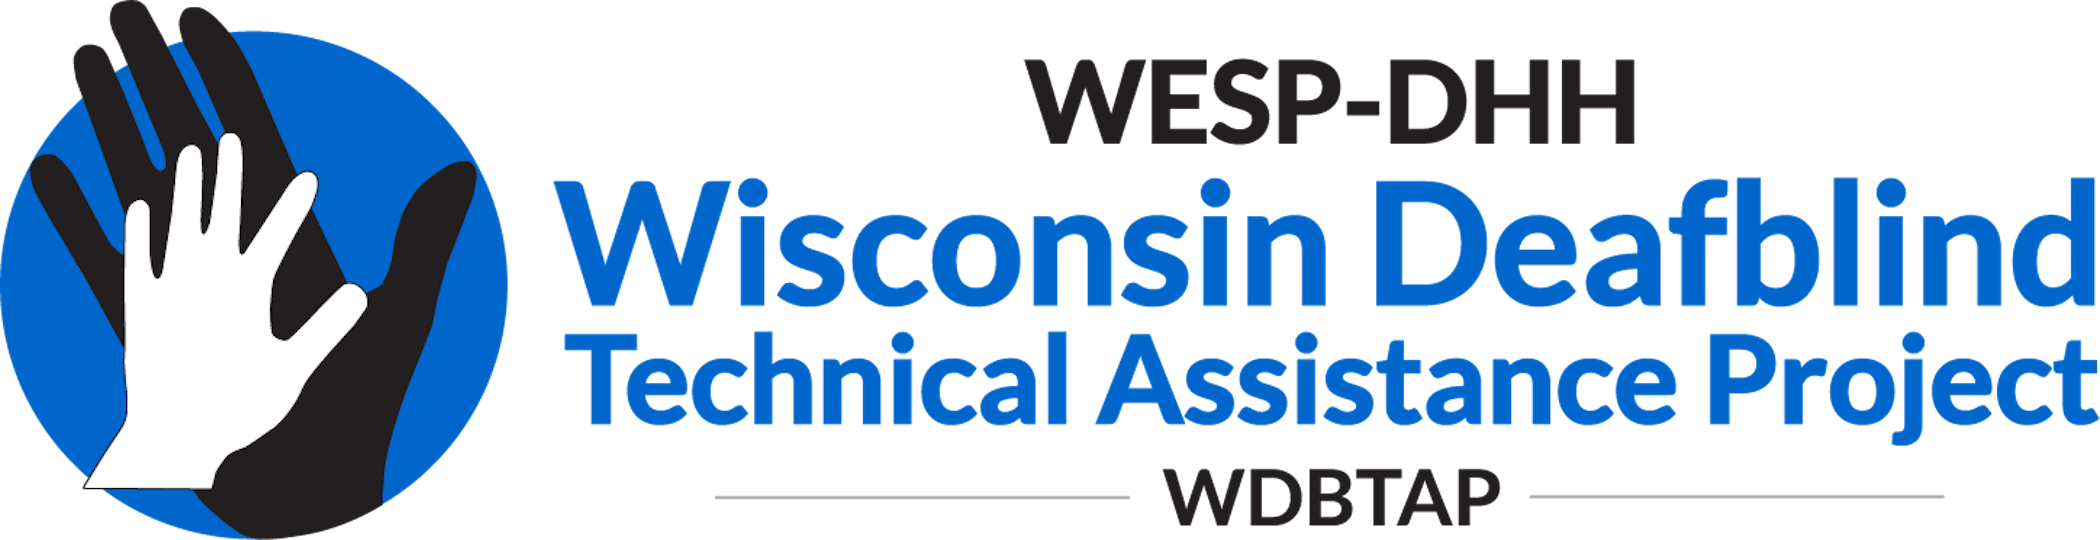 WESP-DHH, Wisconsin Deafblind Technical Assistance Project